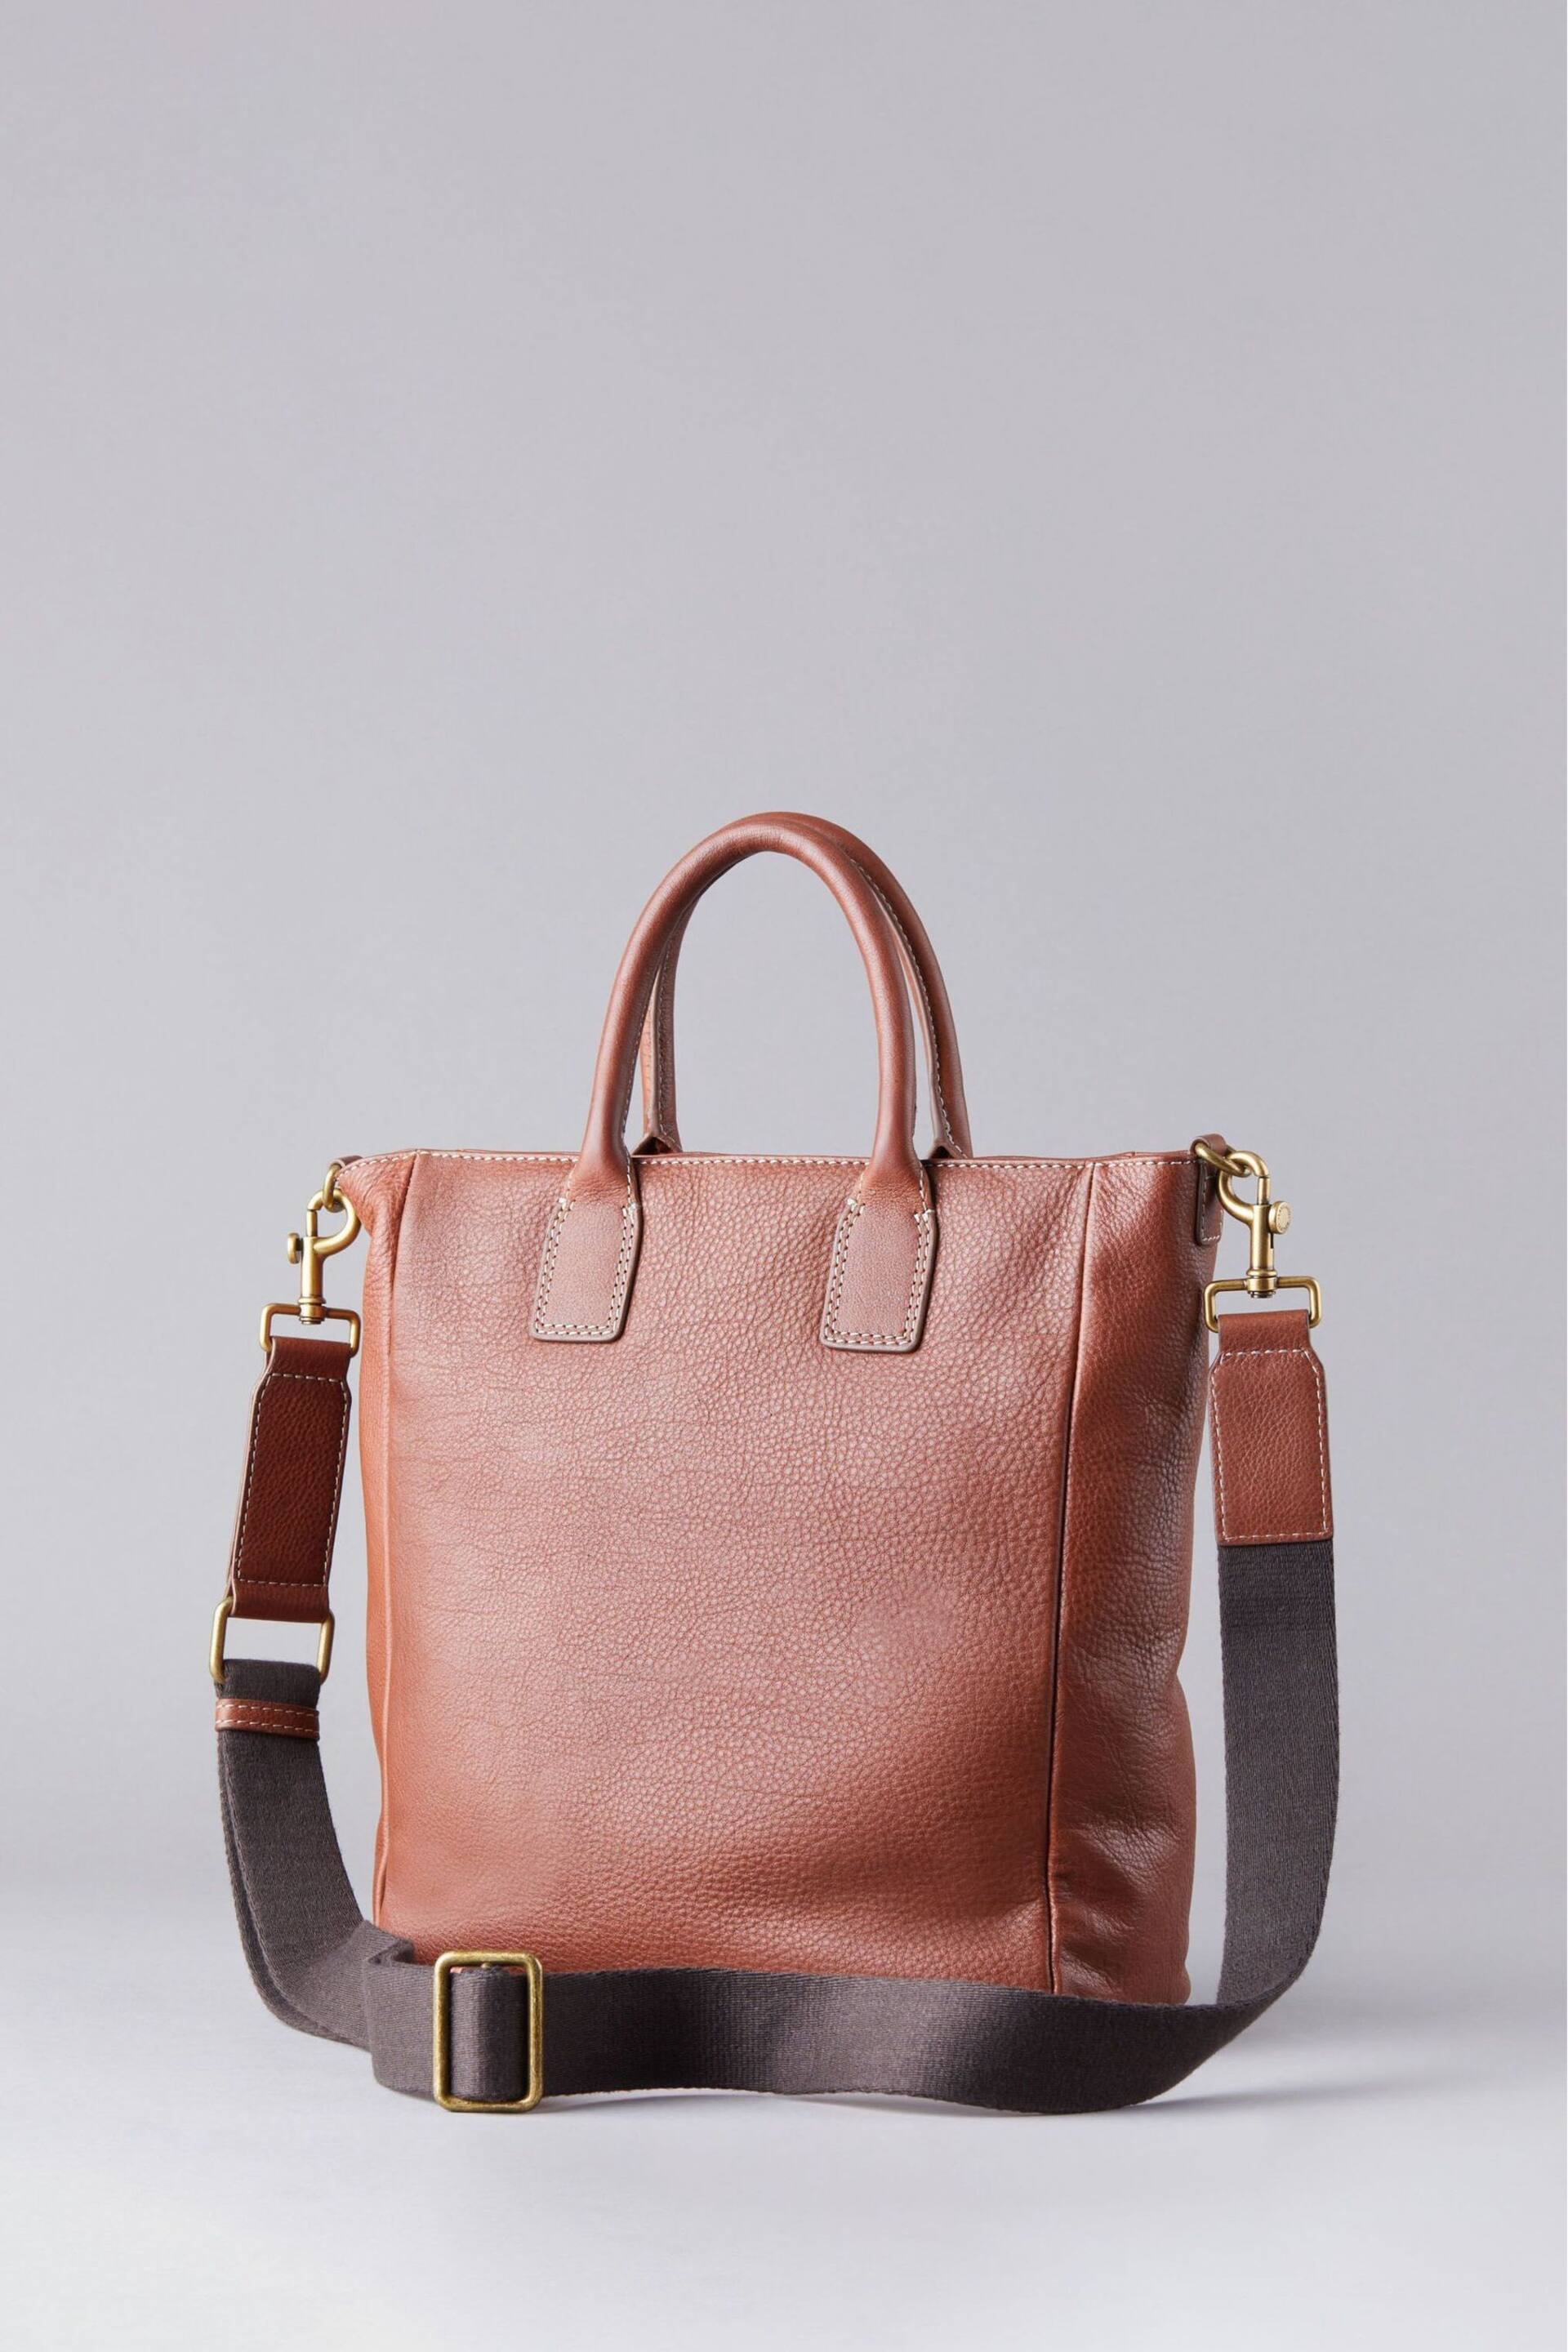 Lakeland Leather Natural Torver Leather Cross-Body Tote Bag - Image 2 of 5